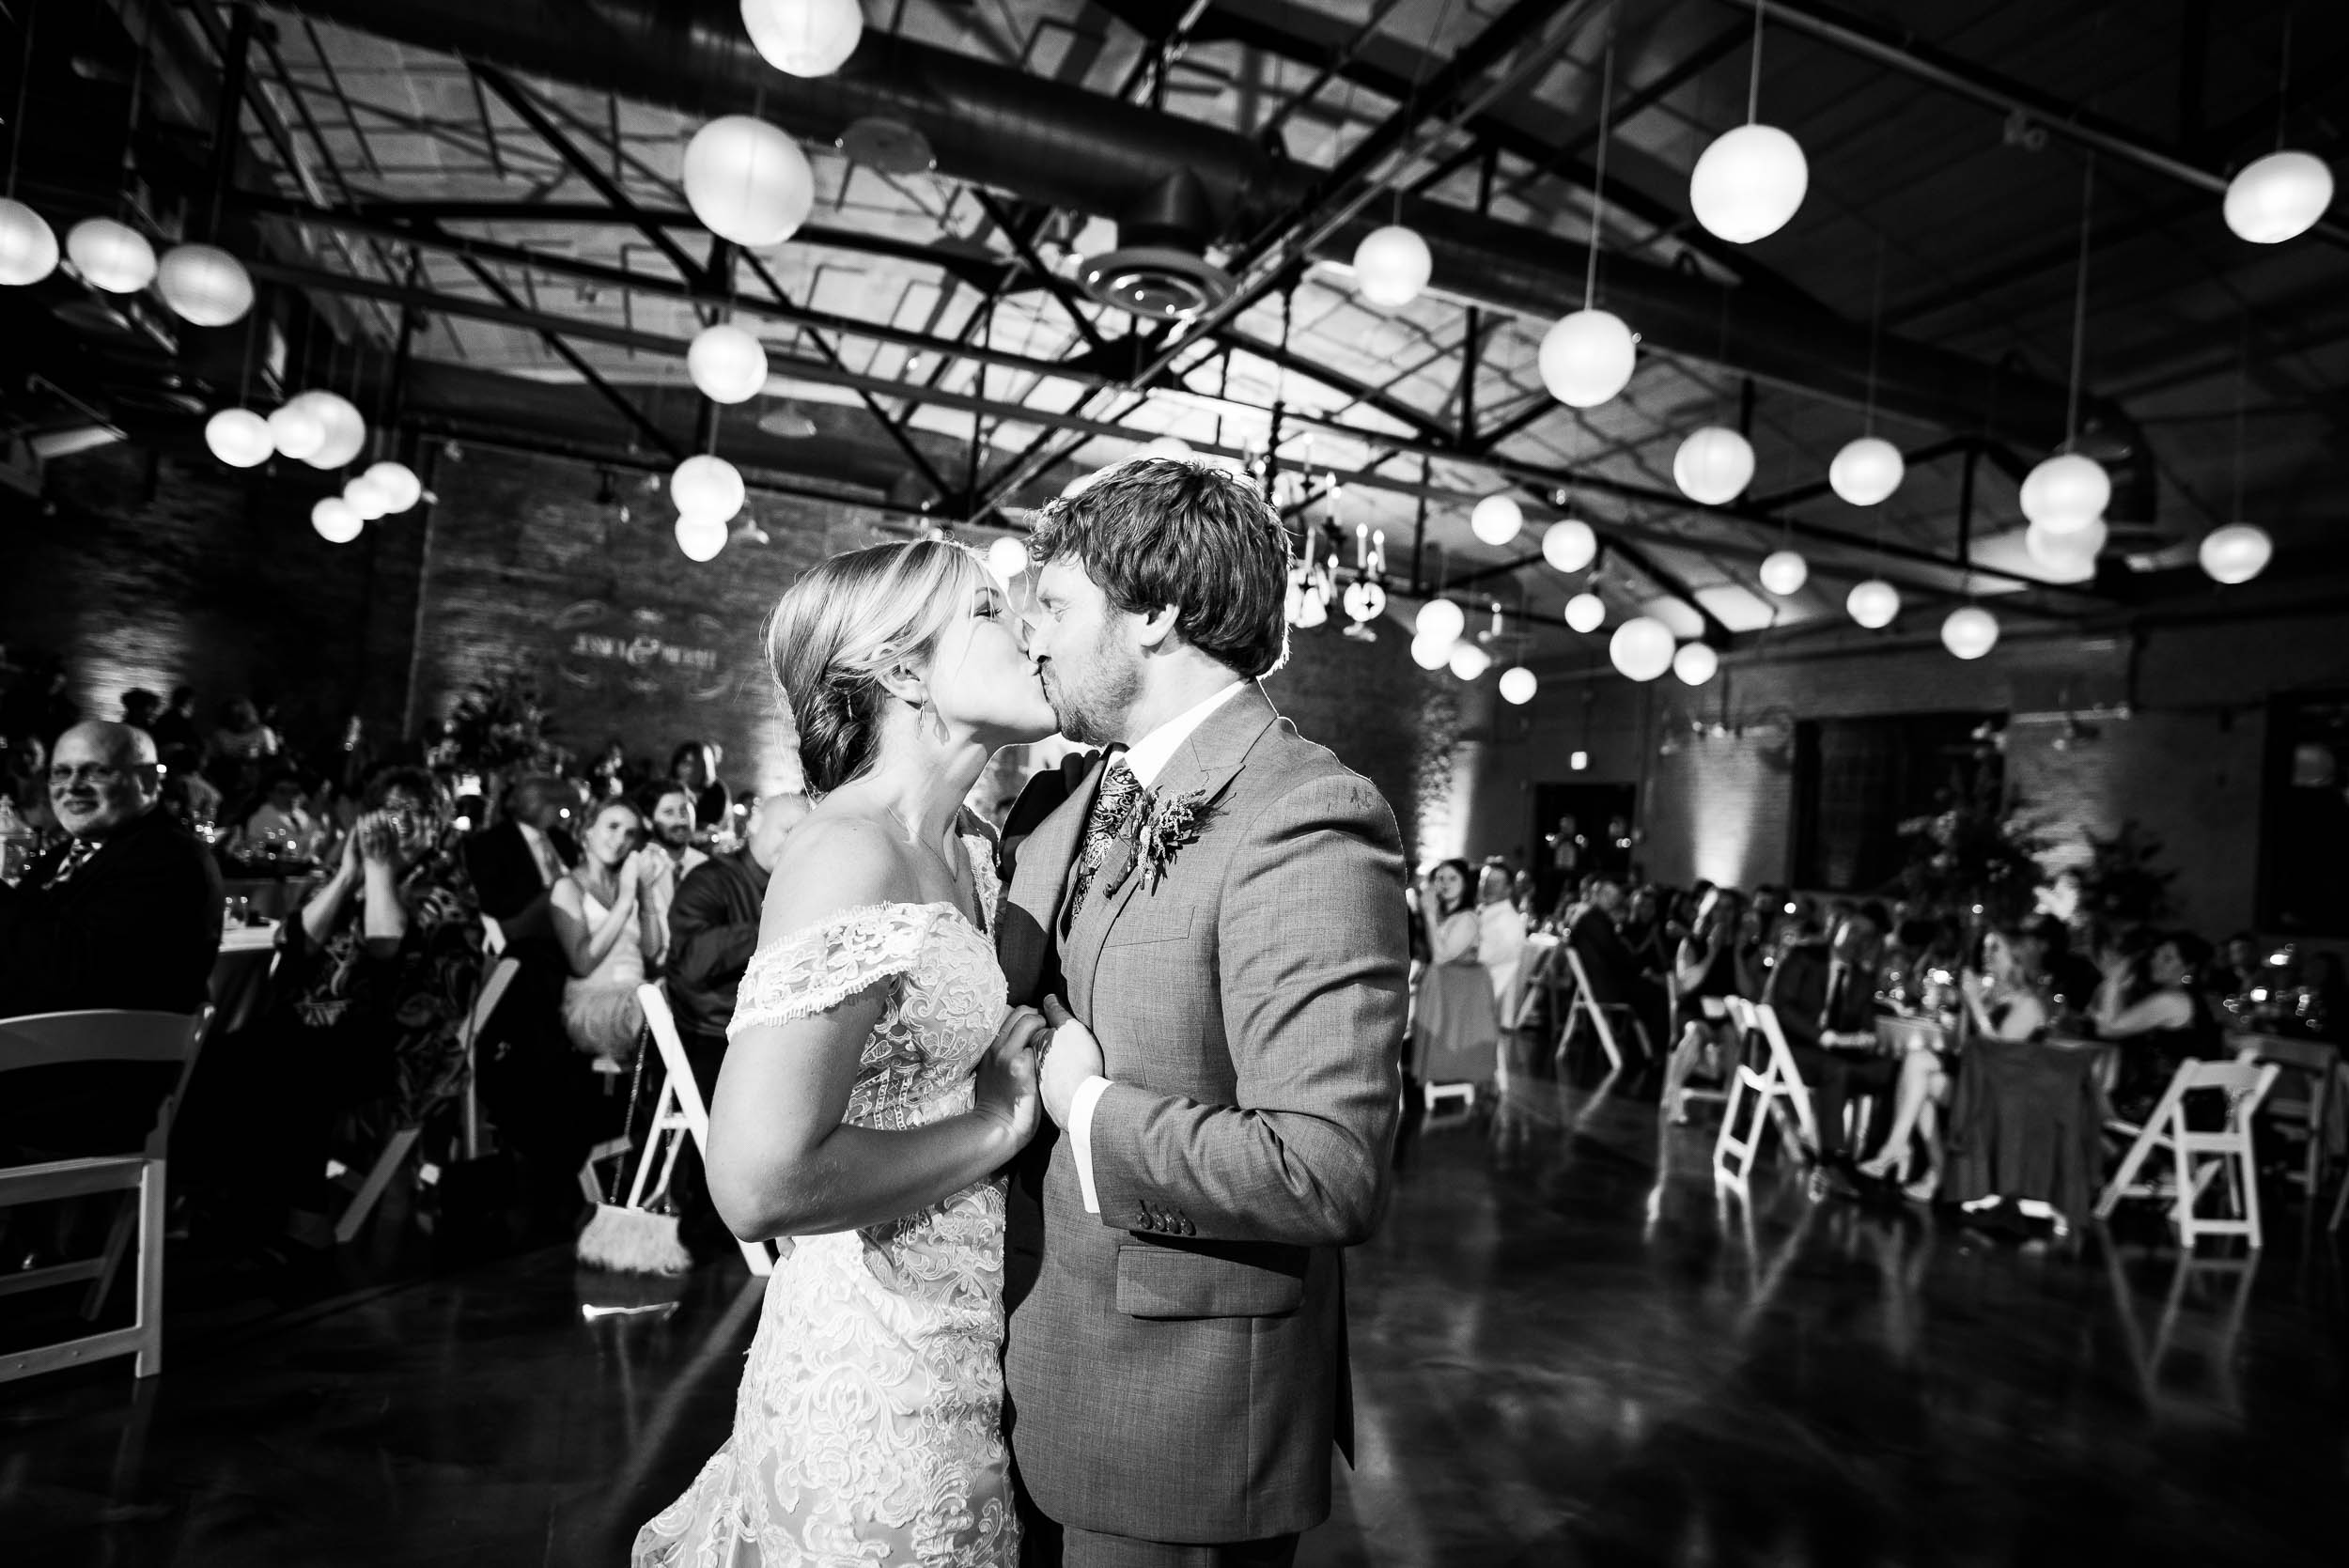 Modern industrial Chicago wedding inside Prairie Street Brewhouse captured by J. Brown Photography. Find more wedding ideas at jbrownphotography.com!